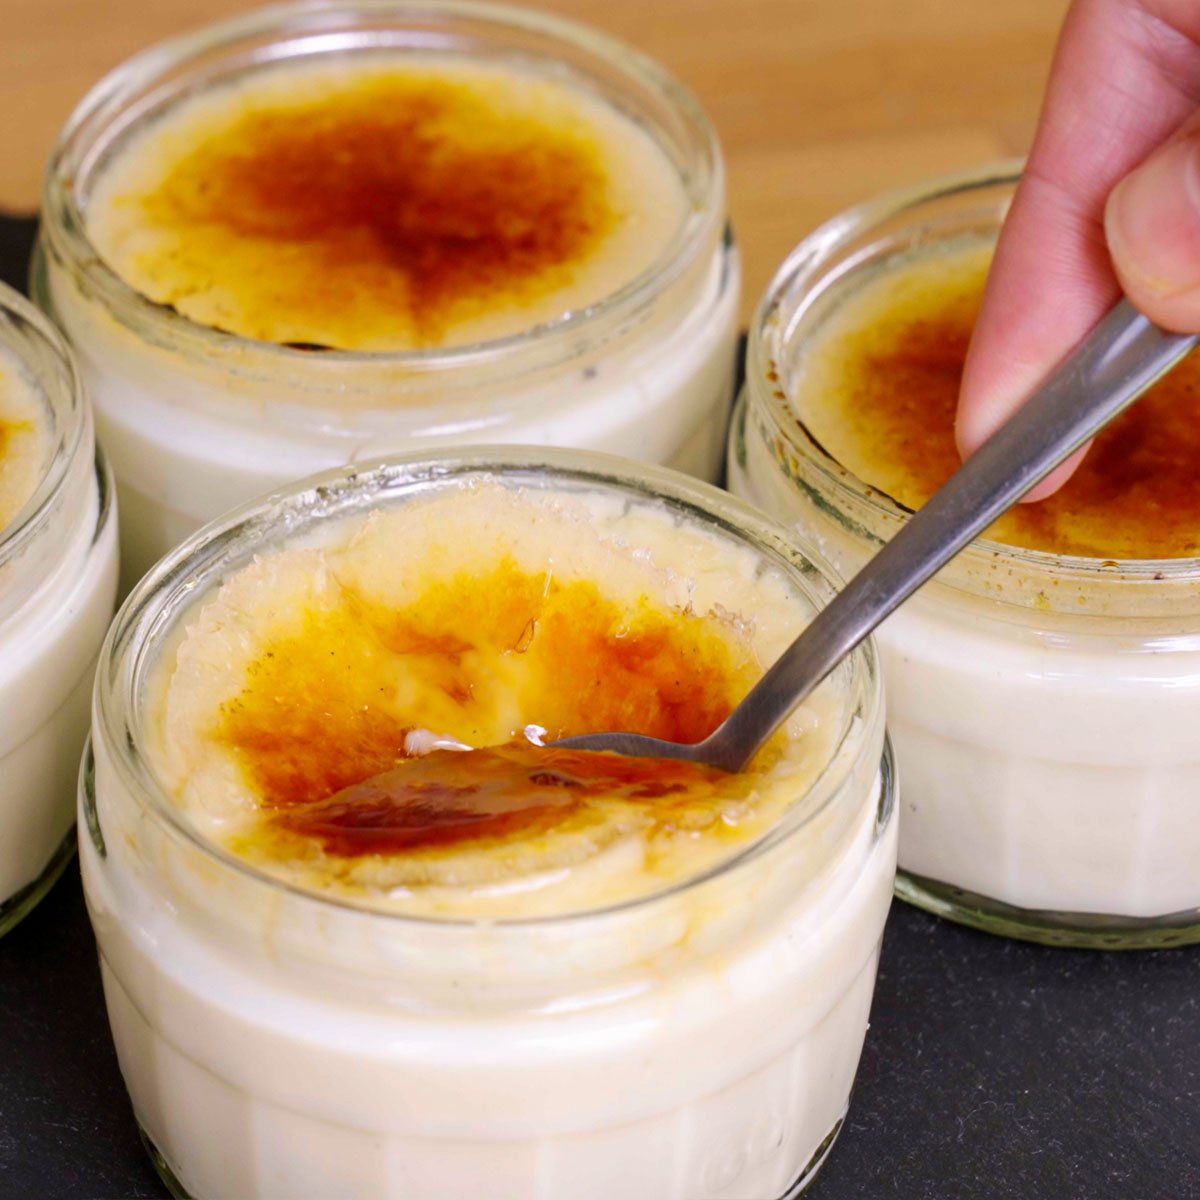 Image of Authentic Crema Catalana with a spoon